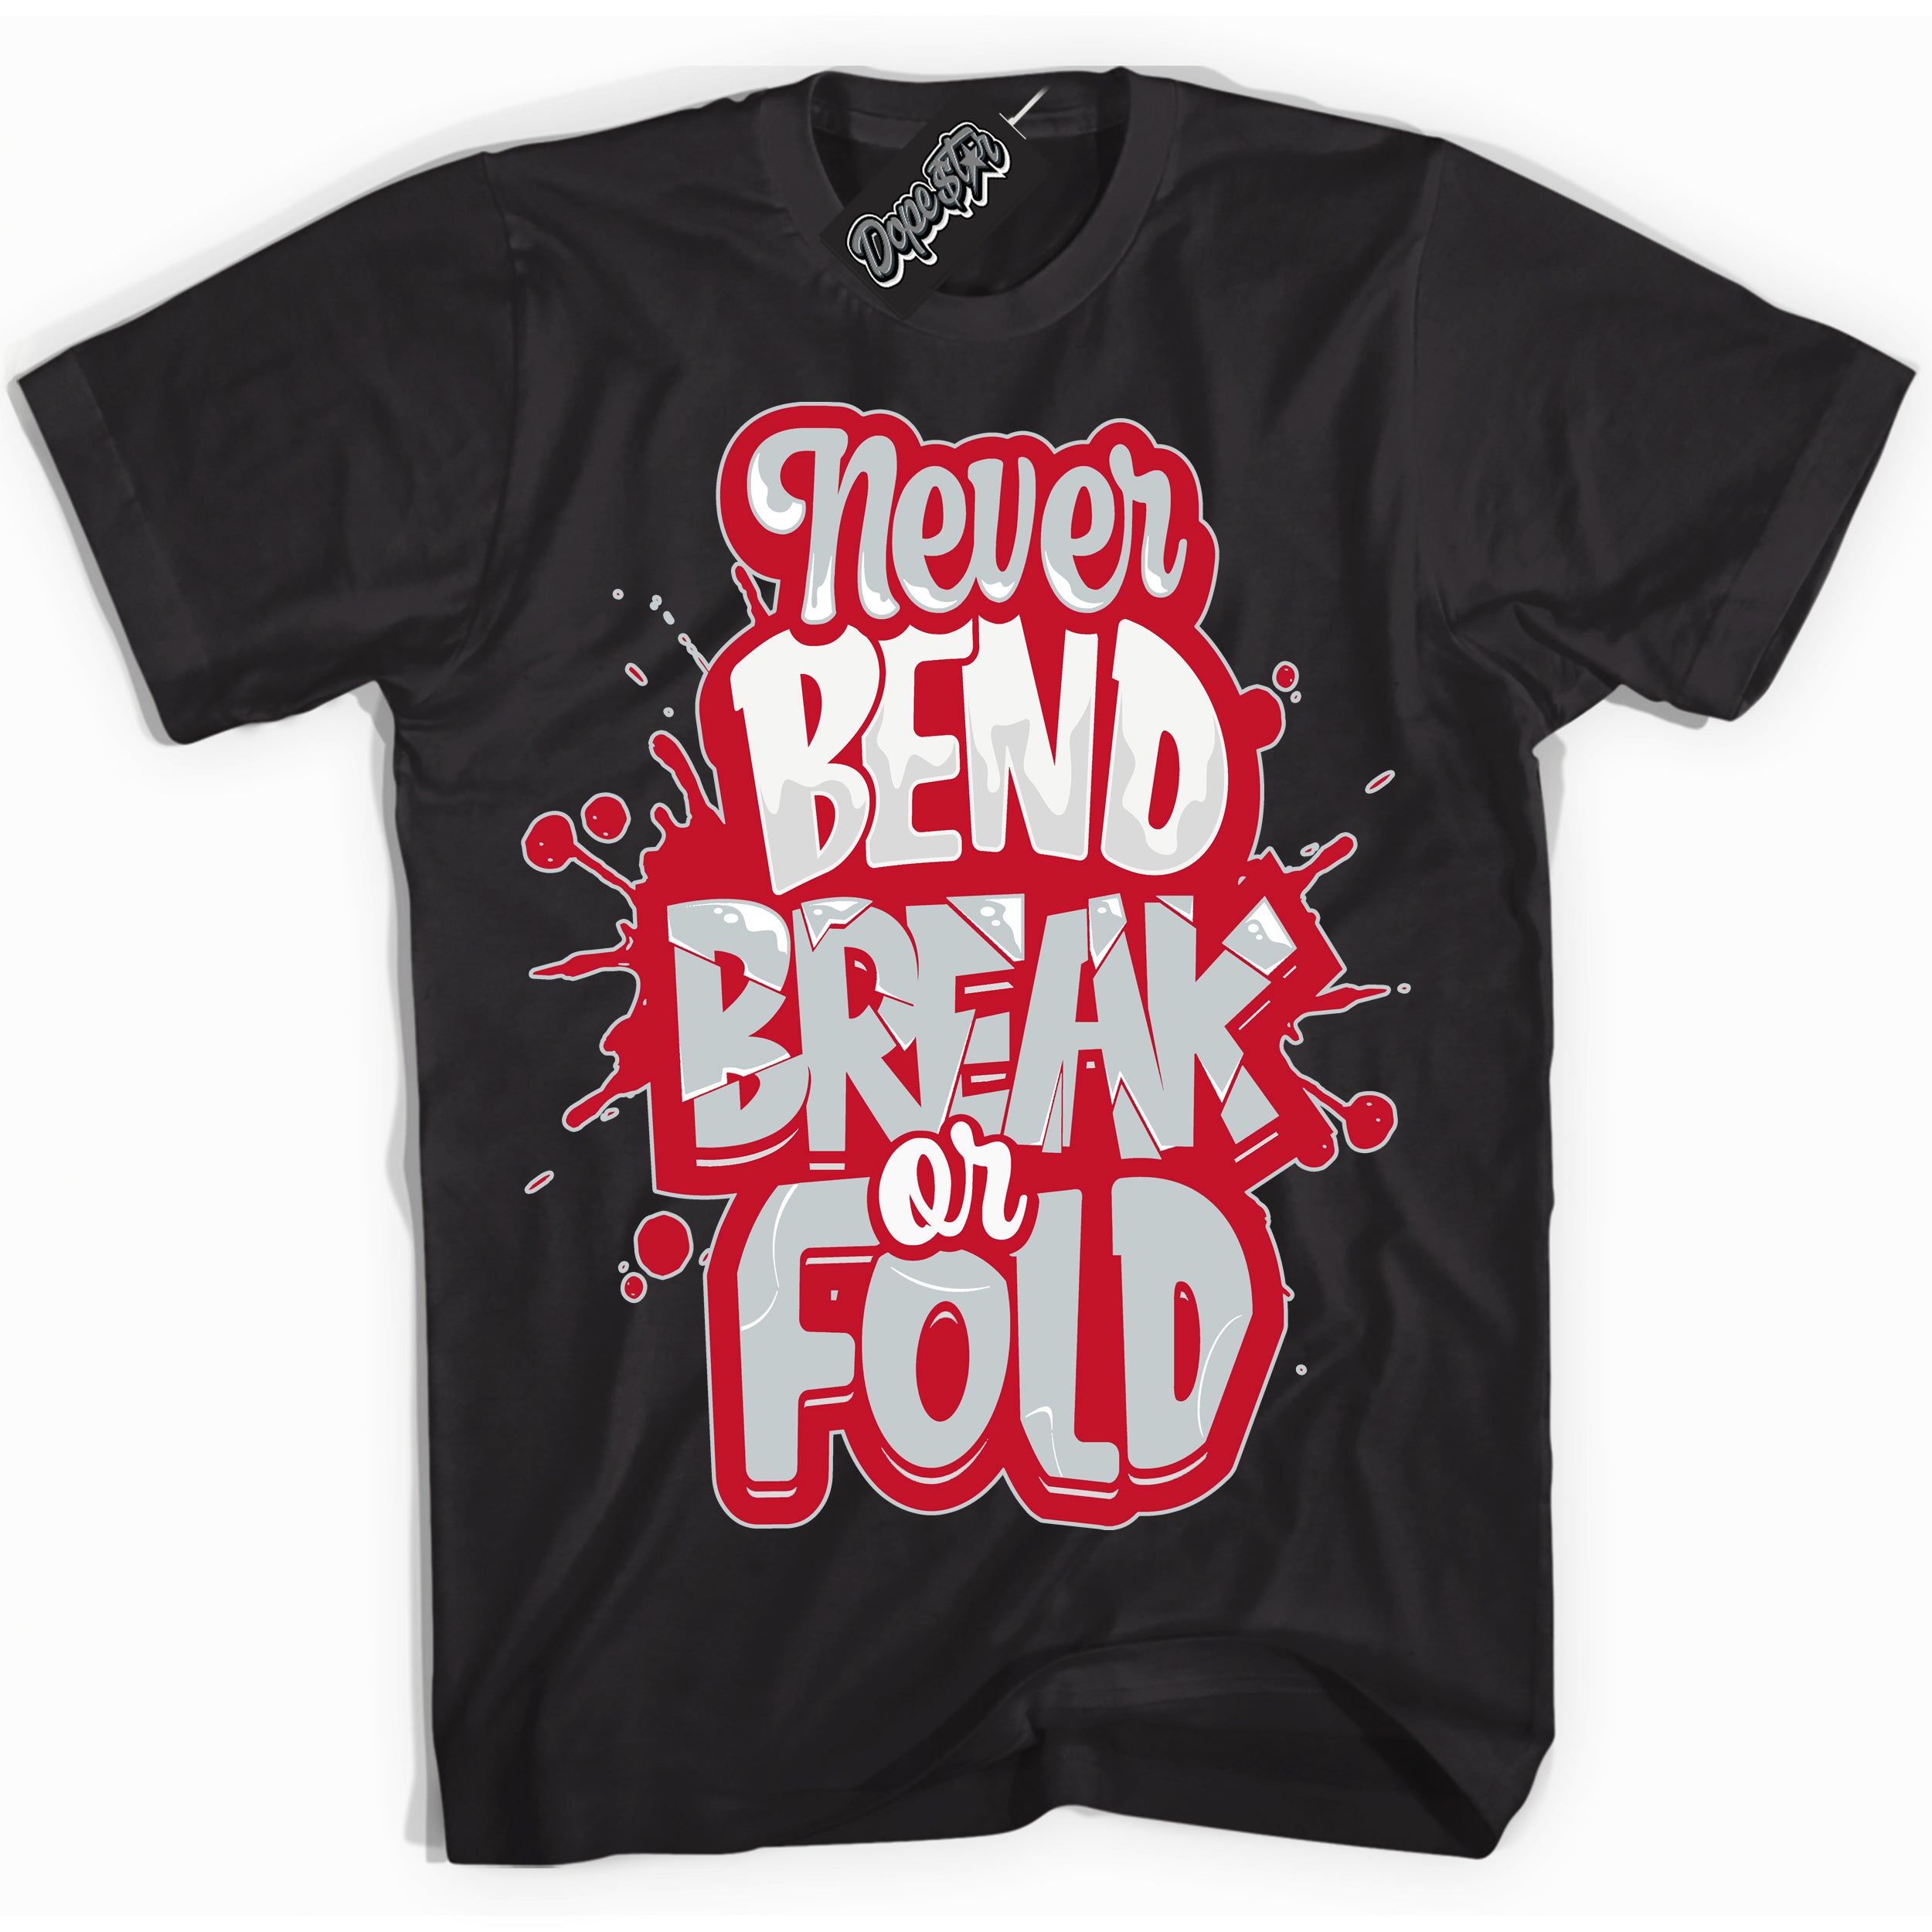 Cool Black Shirt with “ Never Bend Break Or Fold” design that perfectly matches Reverse Ultraman Sneakers.